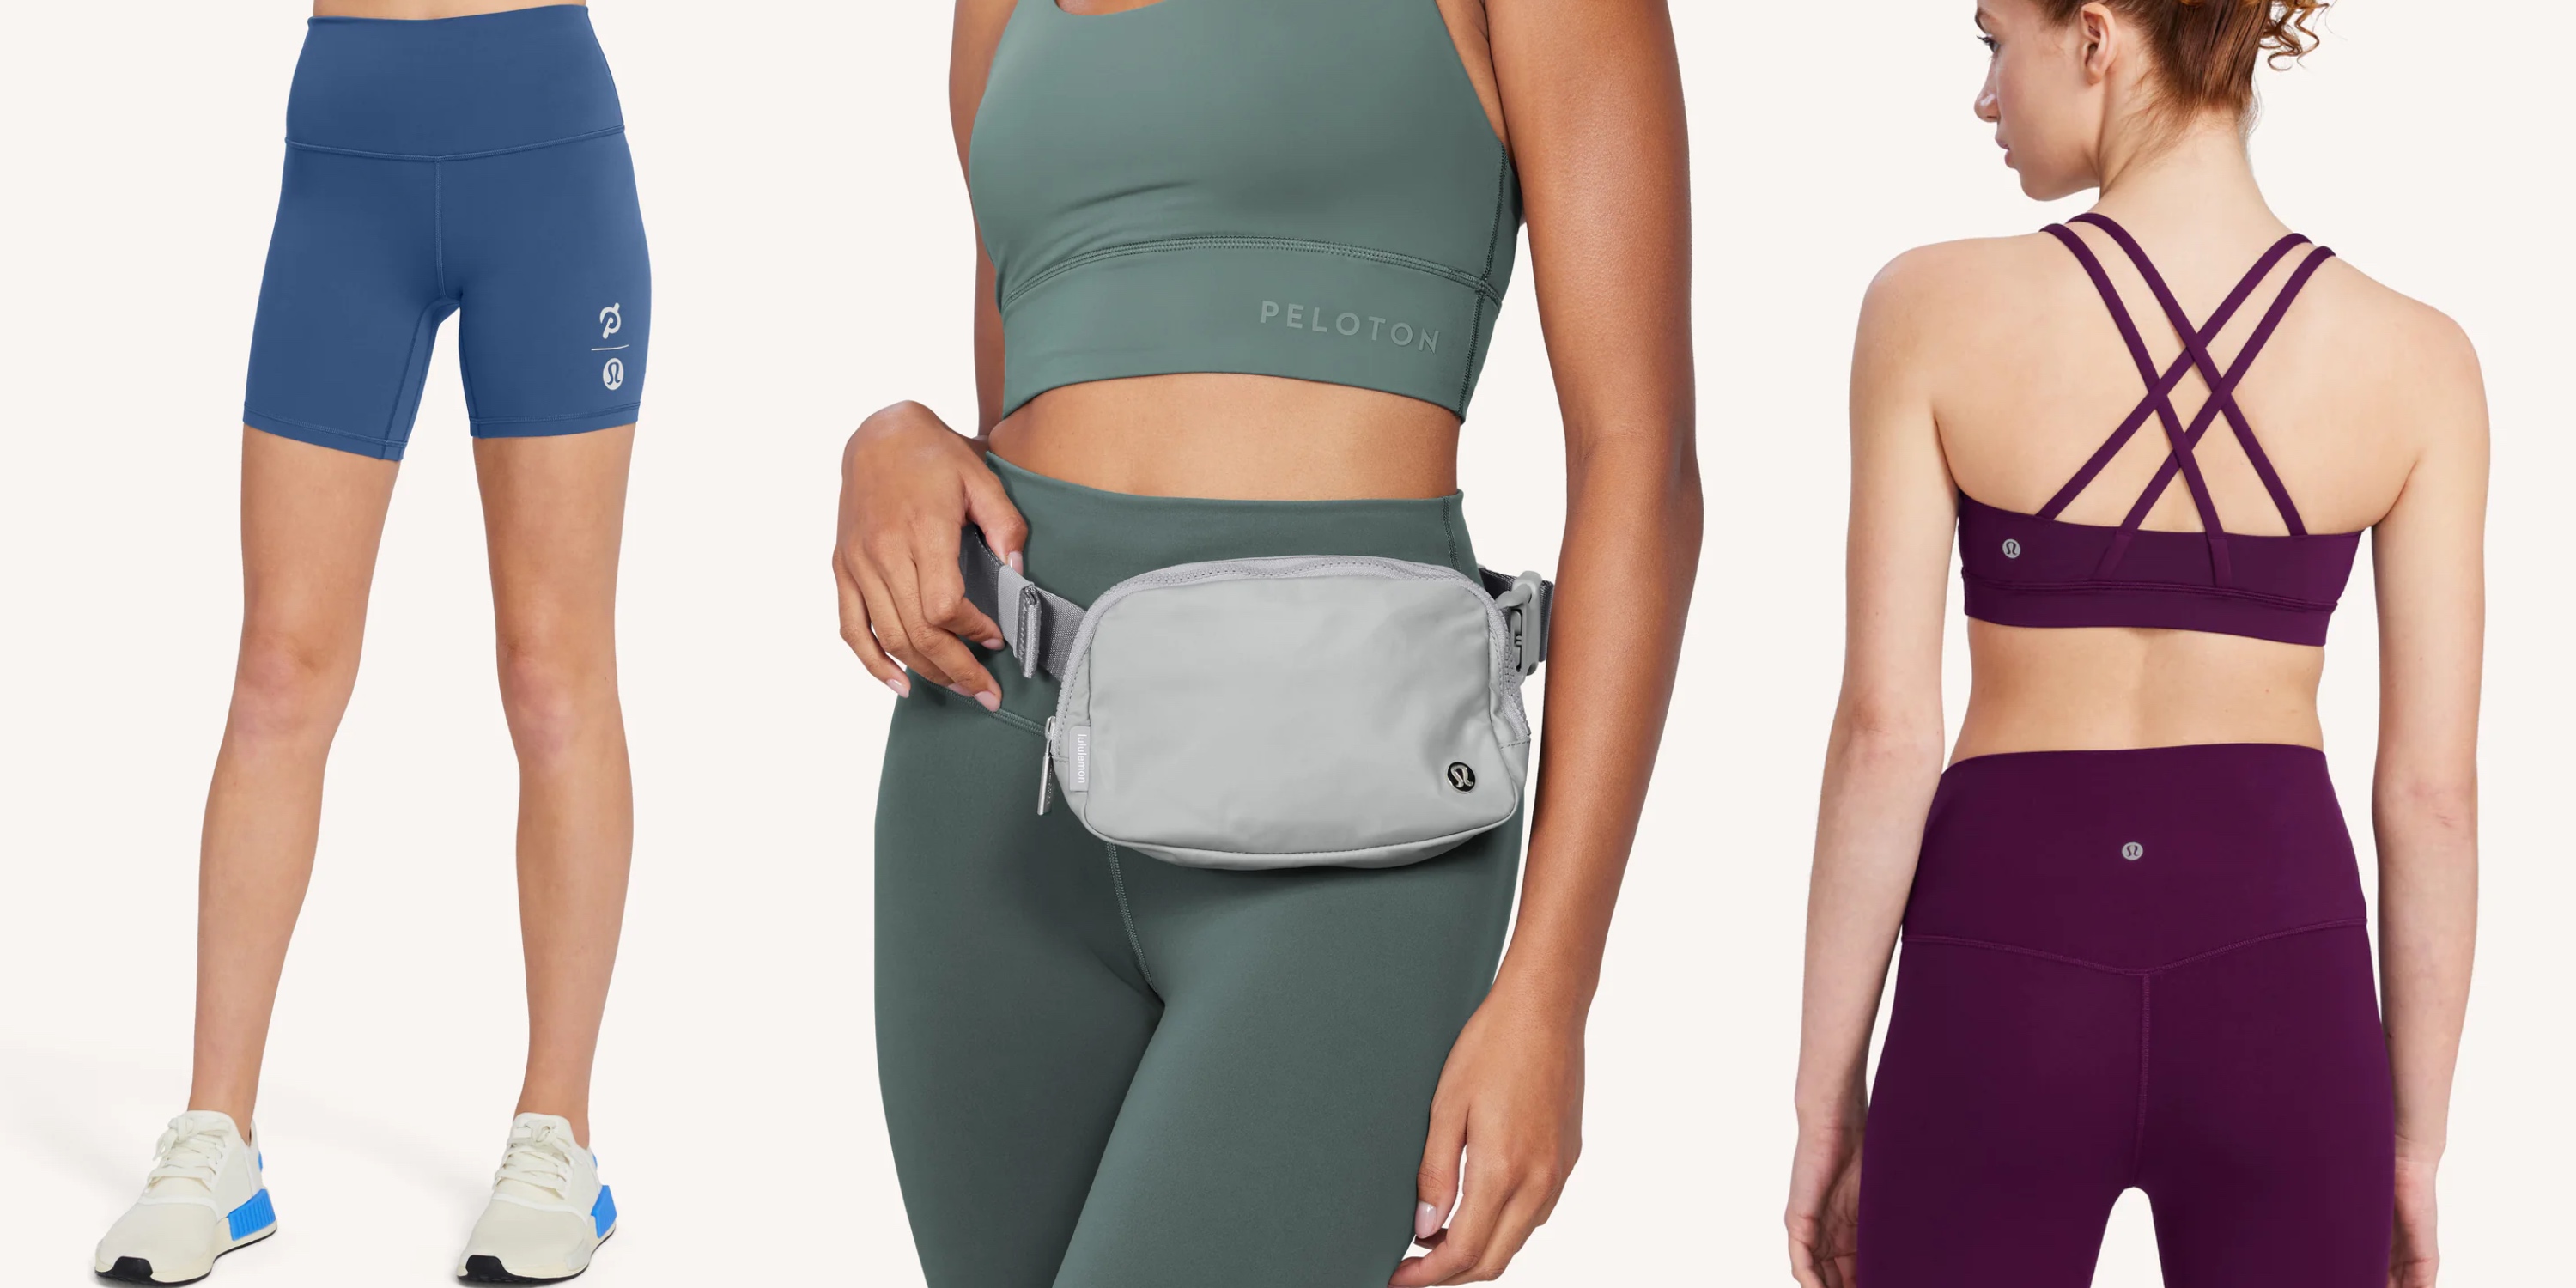 Peloton has launched its new apparel line